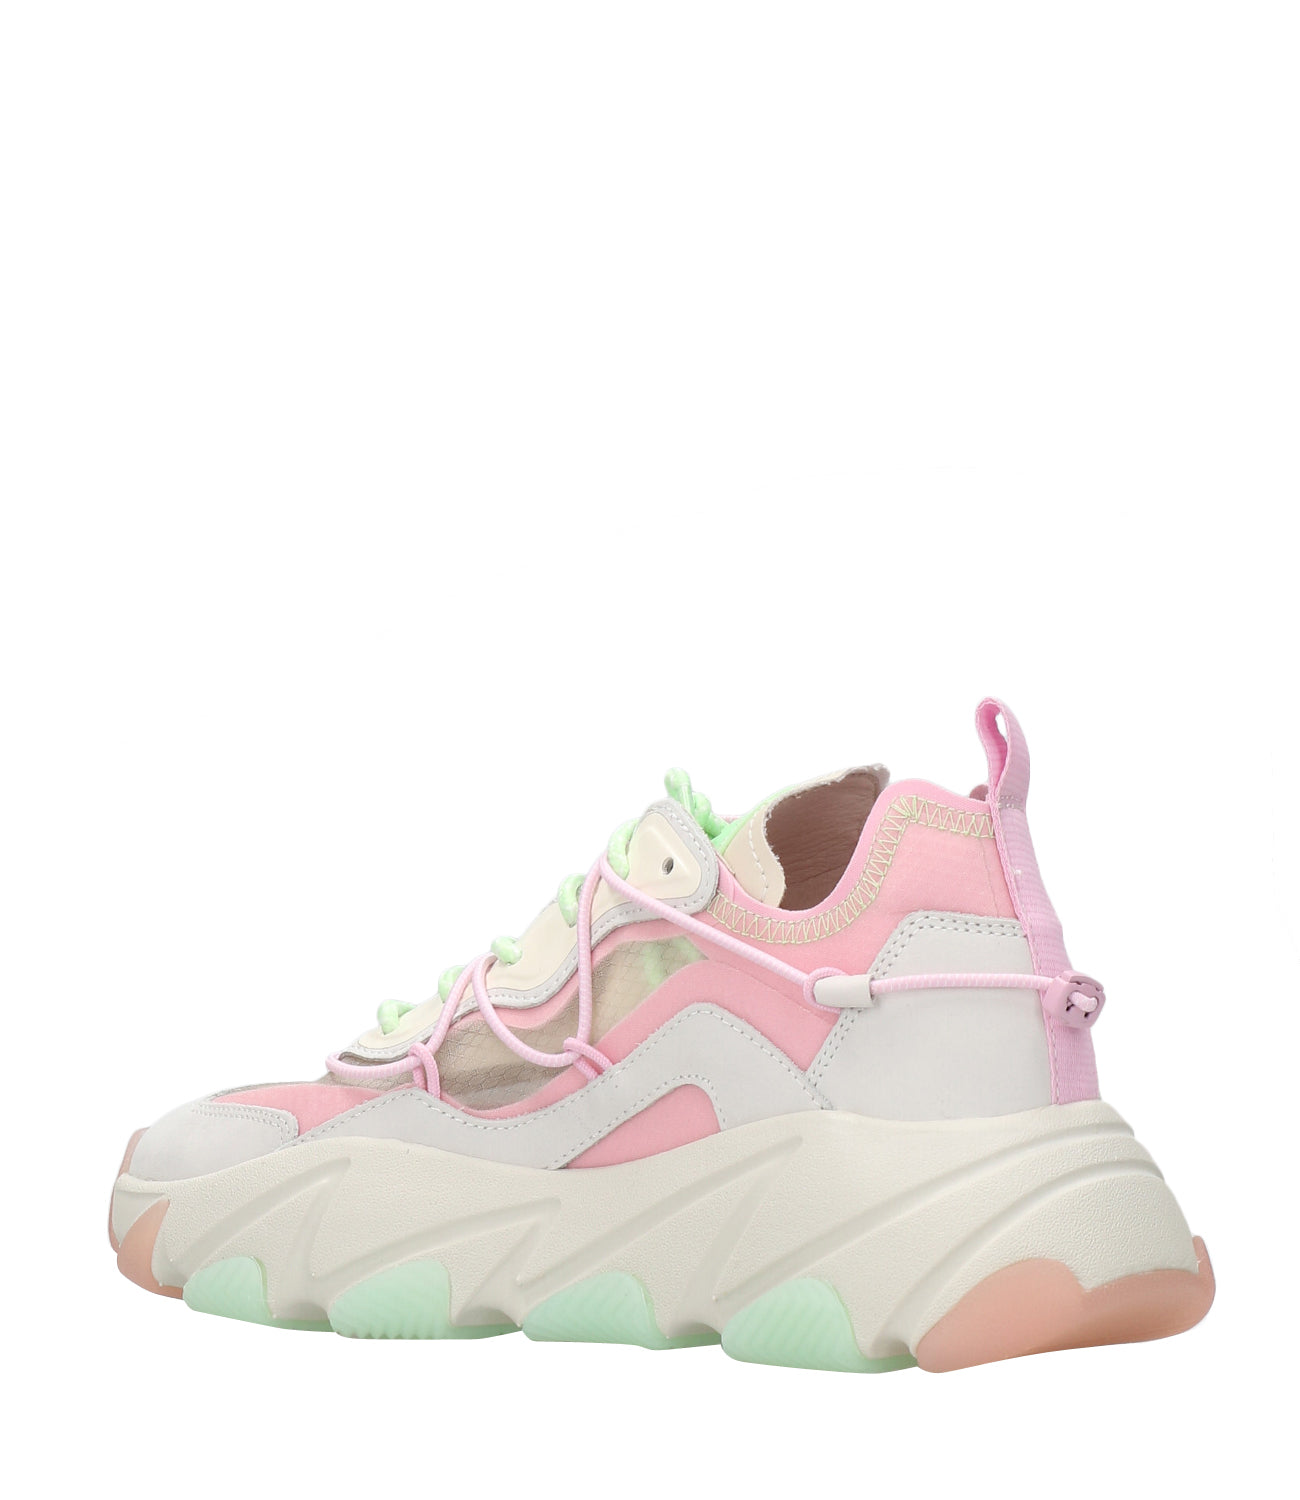 Ash Sport | Sneakers Extrabis Talc and Pink